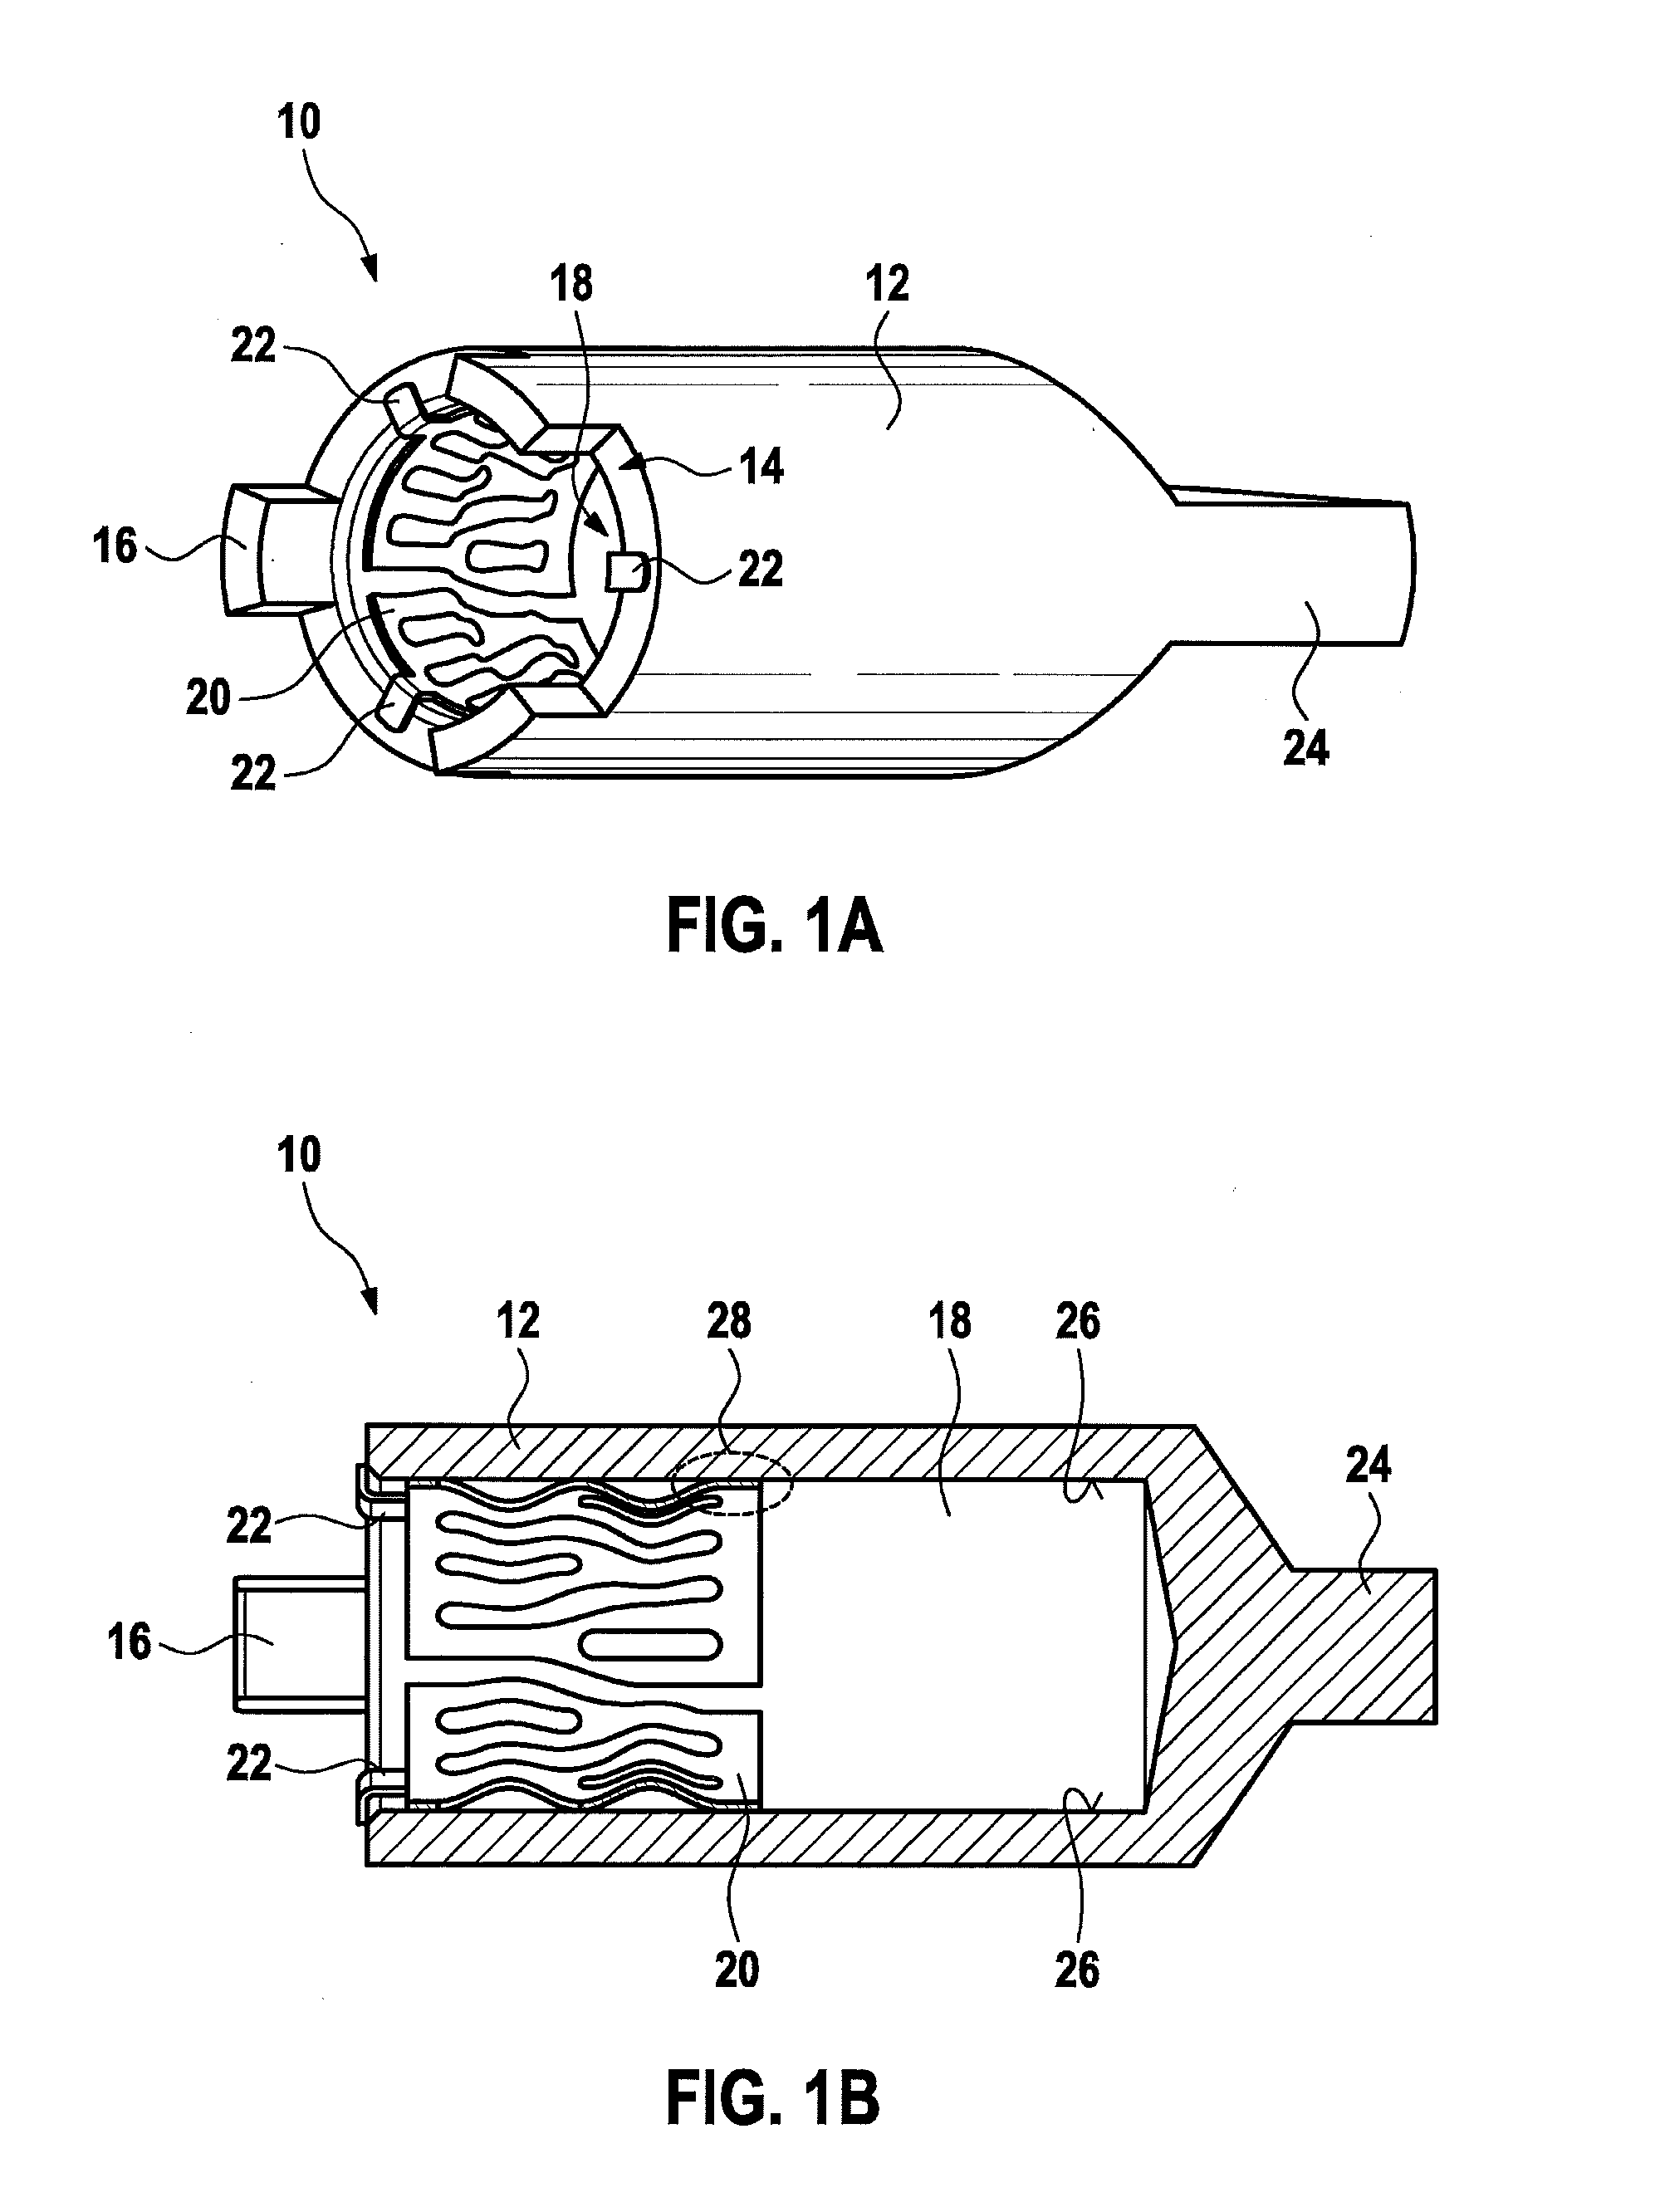 High-current plug-in connection with multi-arm contact lamellae